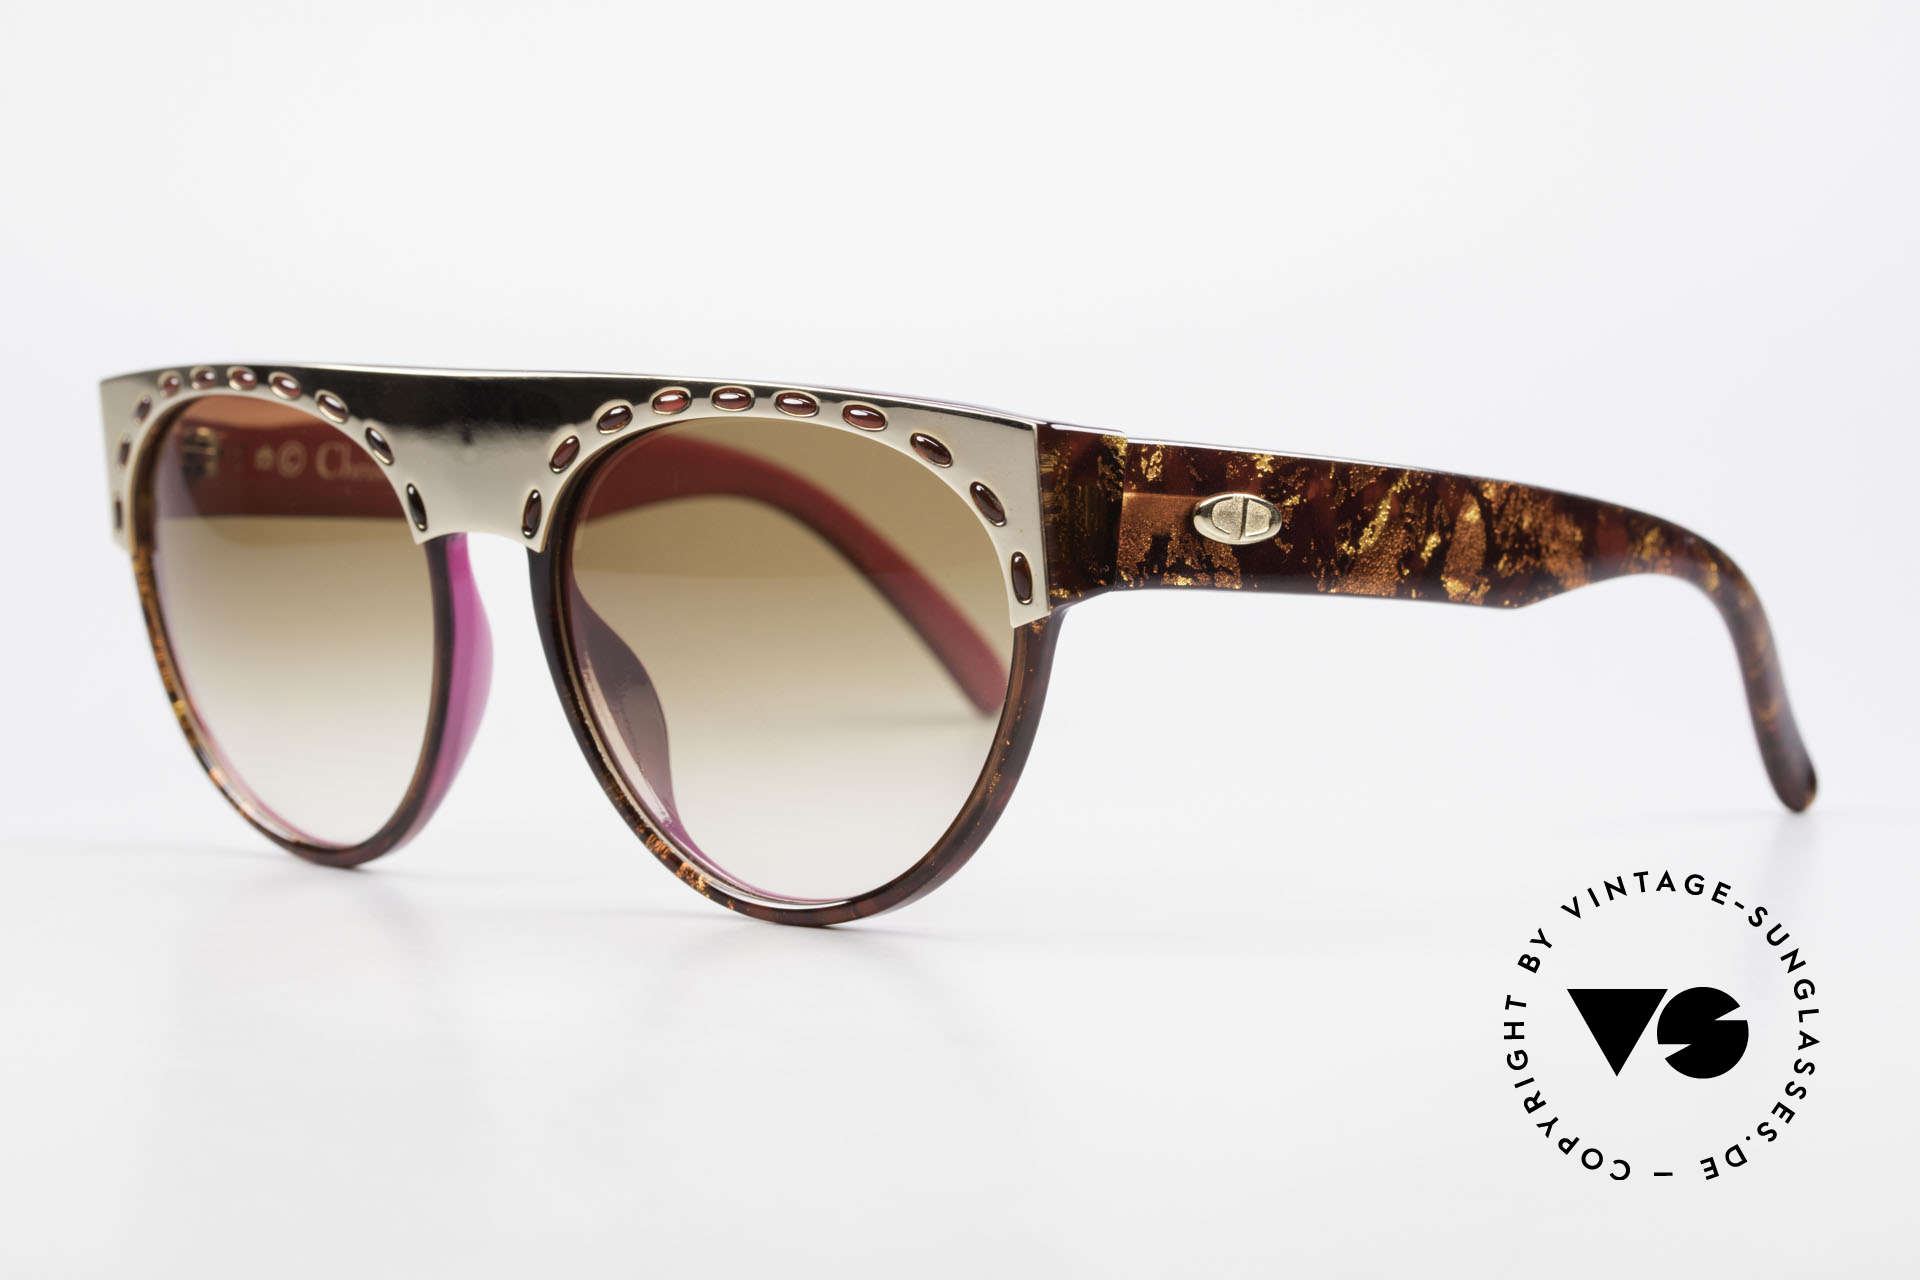 Christian Dior 2437 Ladies Sunglasses 80's Vintage, frame shines amber-havana & completely pink on the back, Made for Women